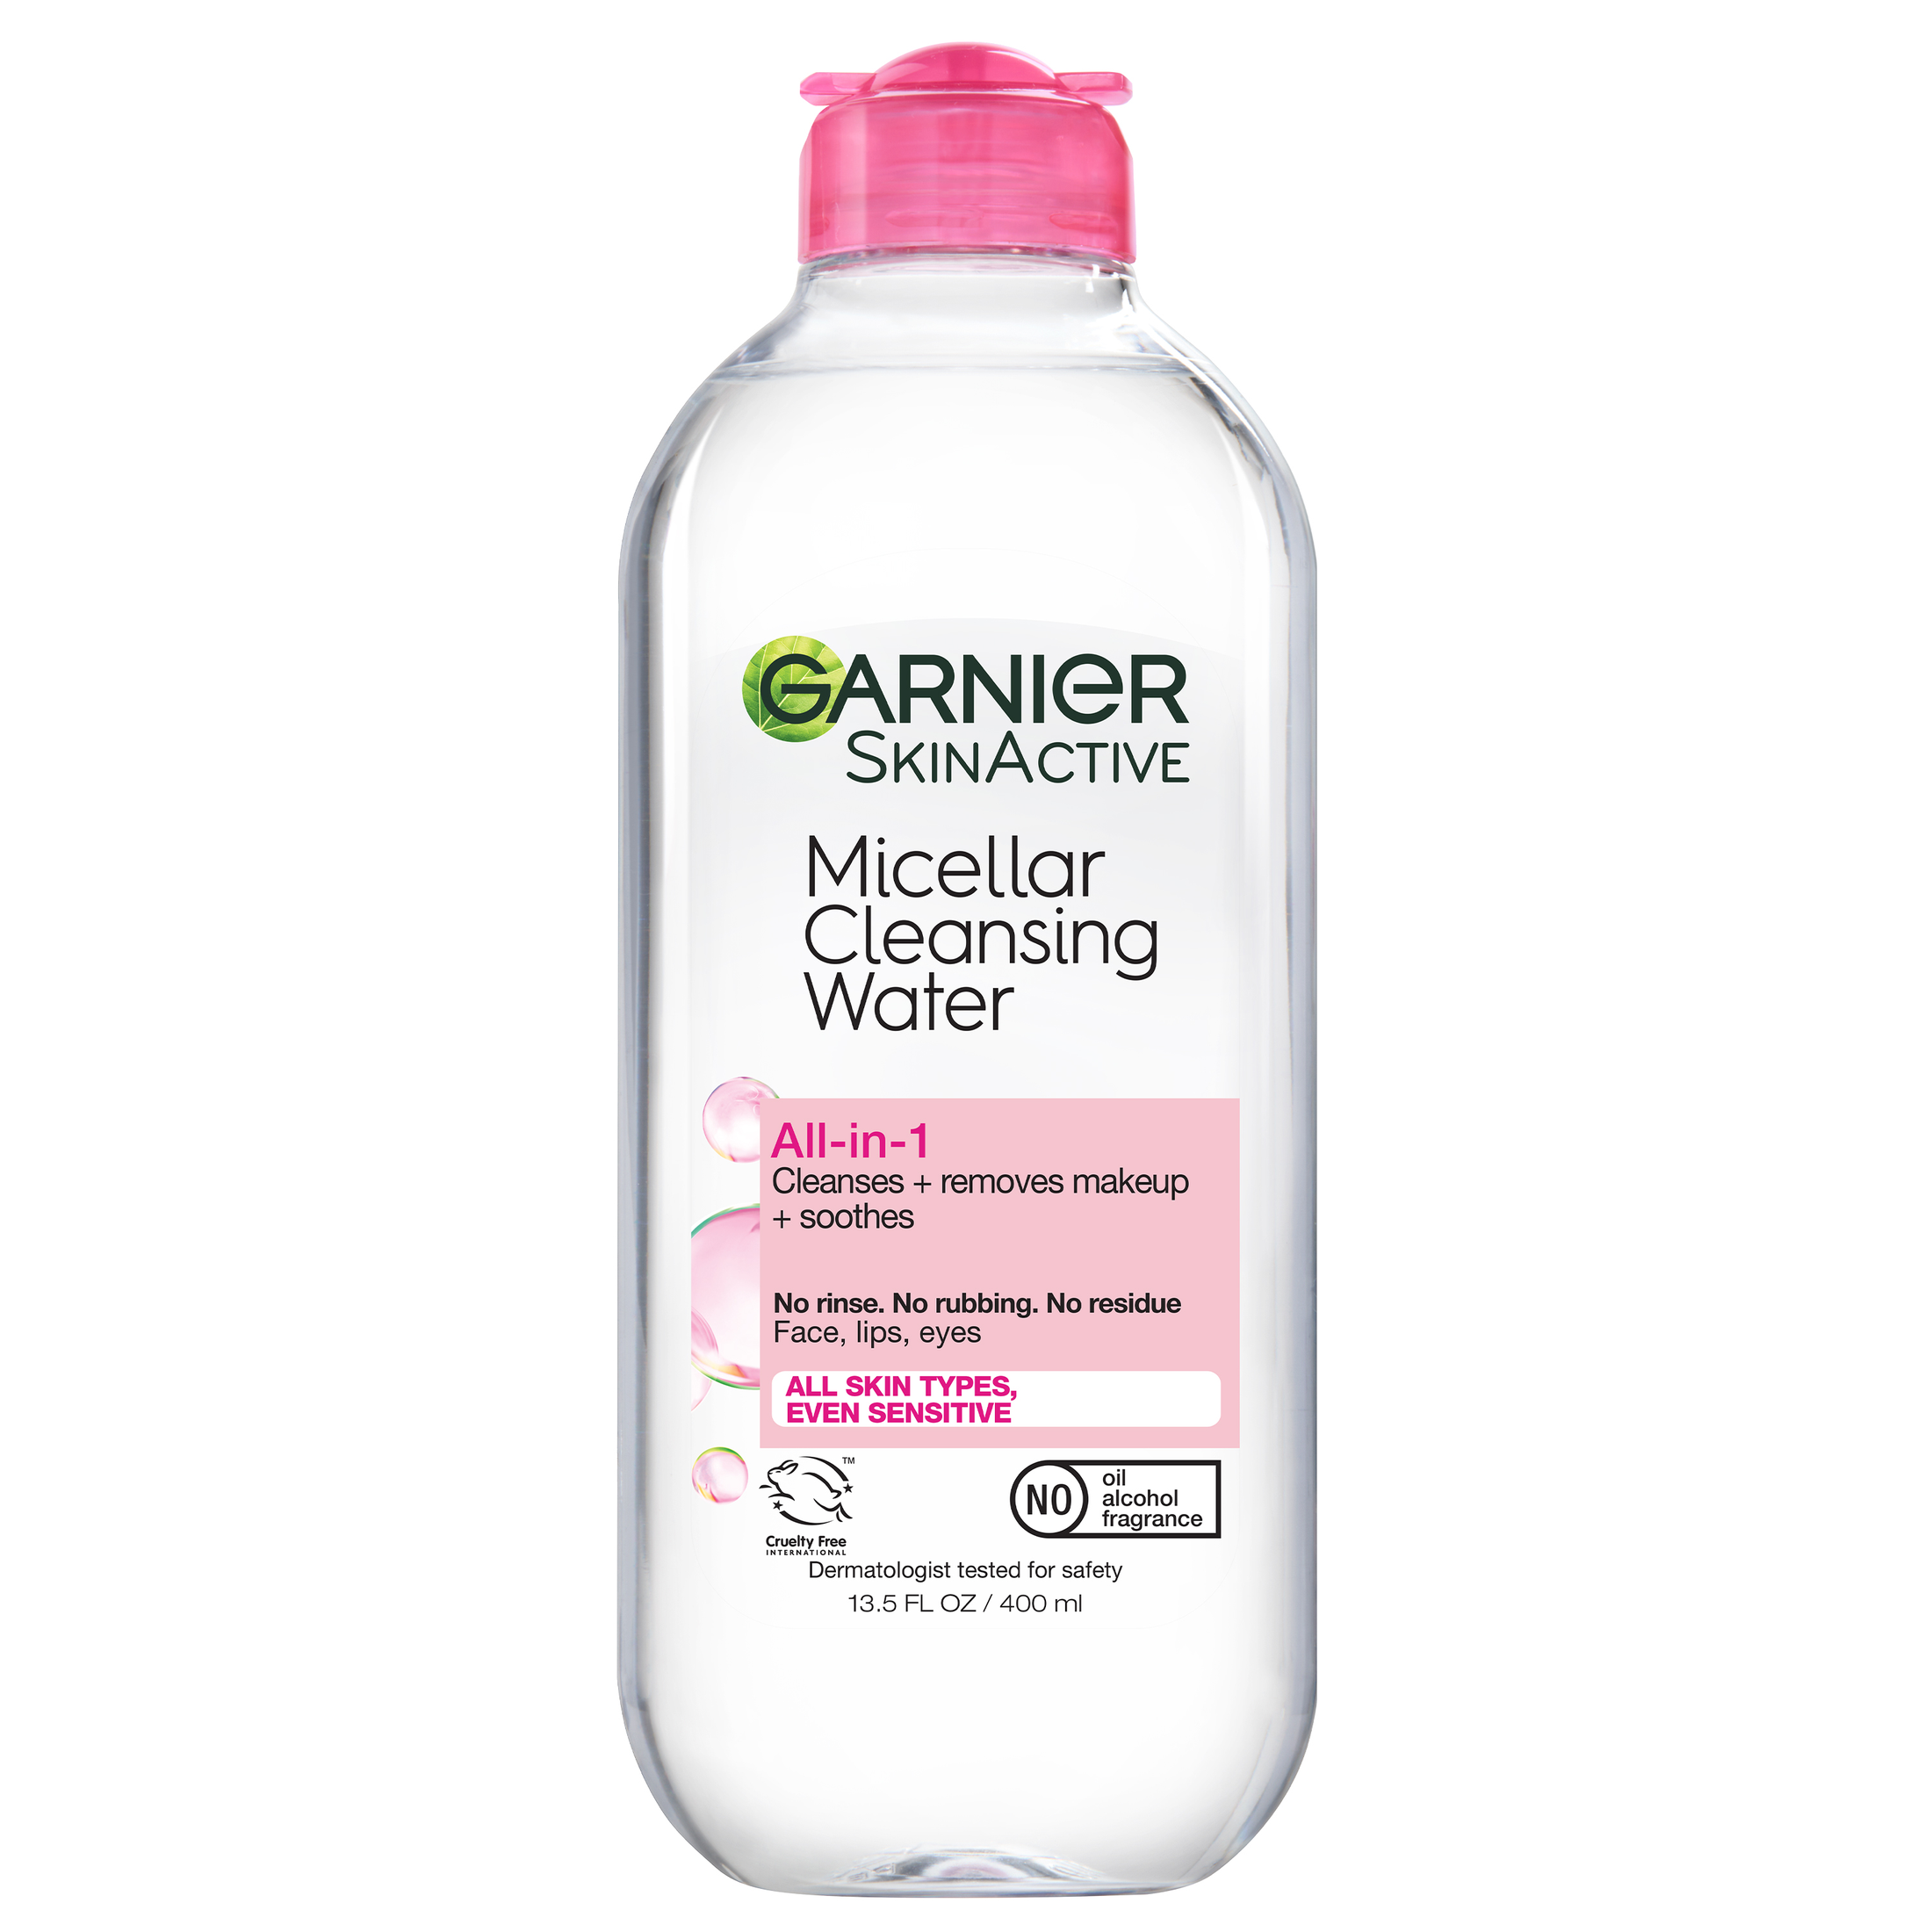 Garnier SkinActive Micellar Cleansing Water All in 1 Makeup Remover Cleanses, 13.5 fl oz - image 1 of 10